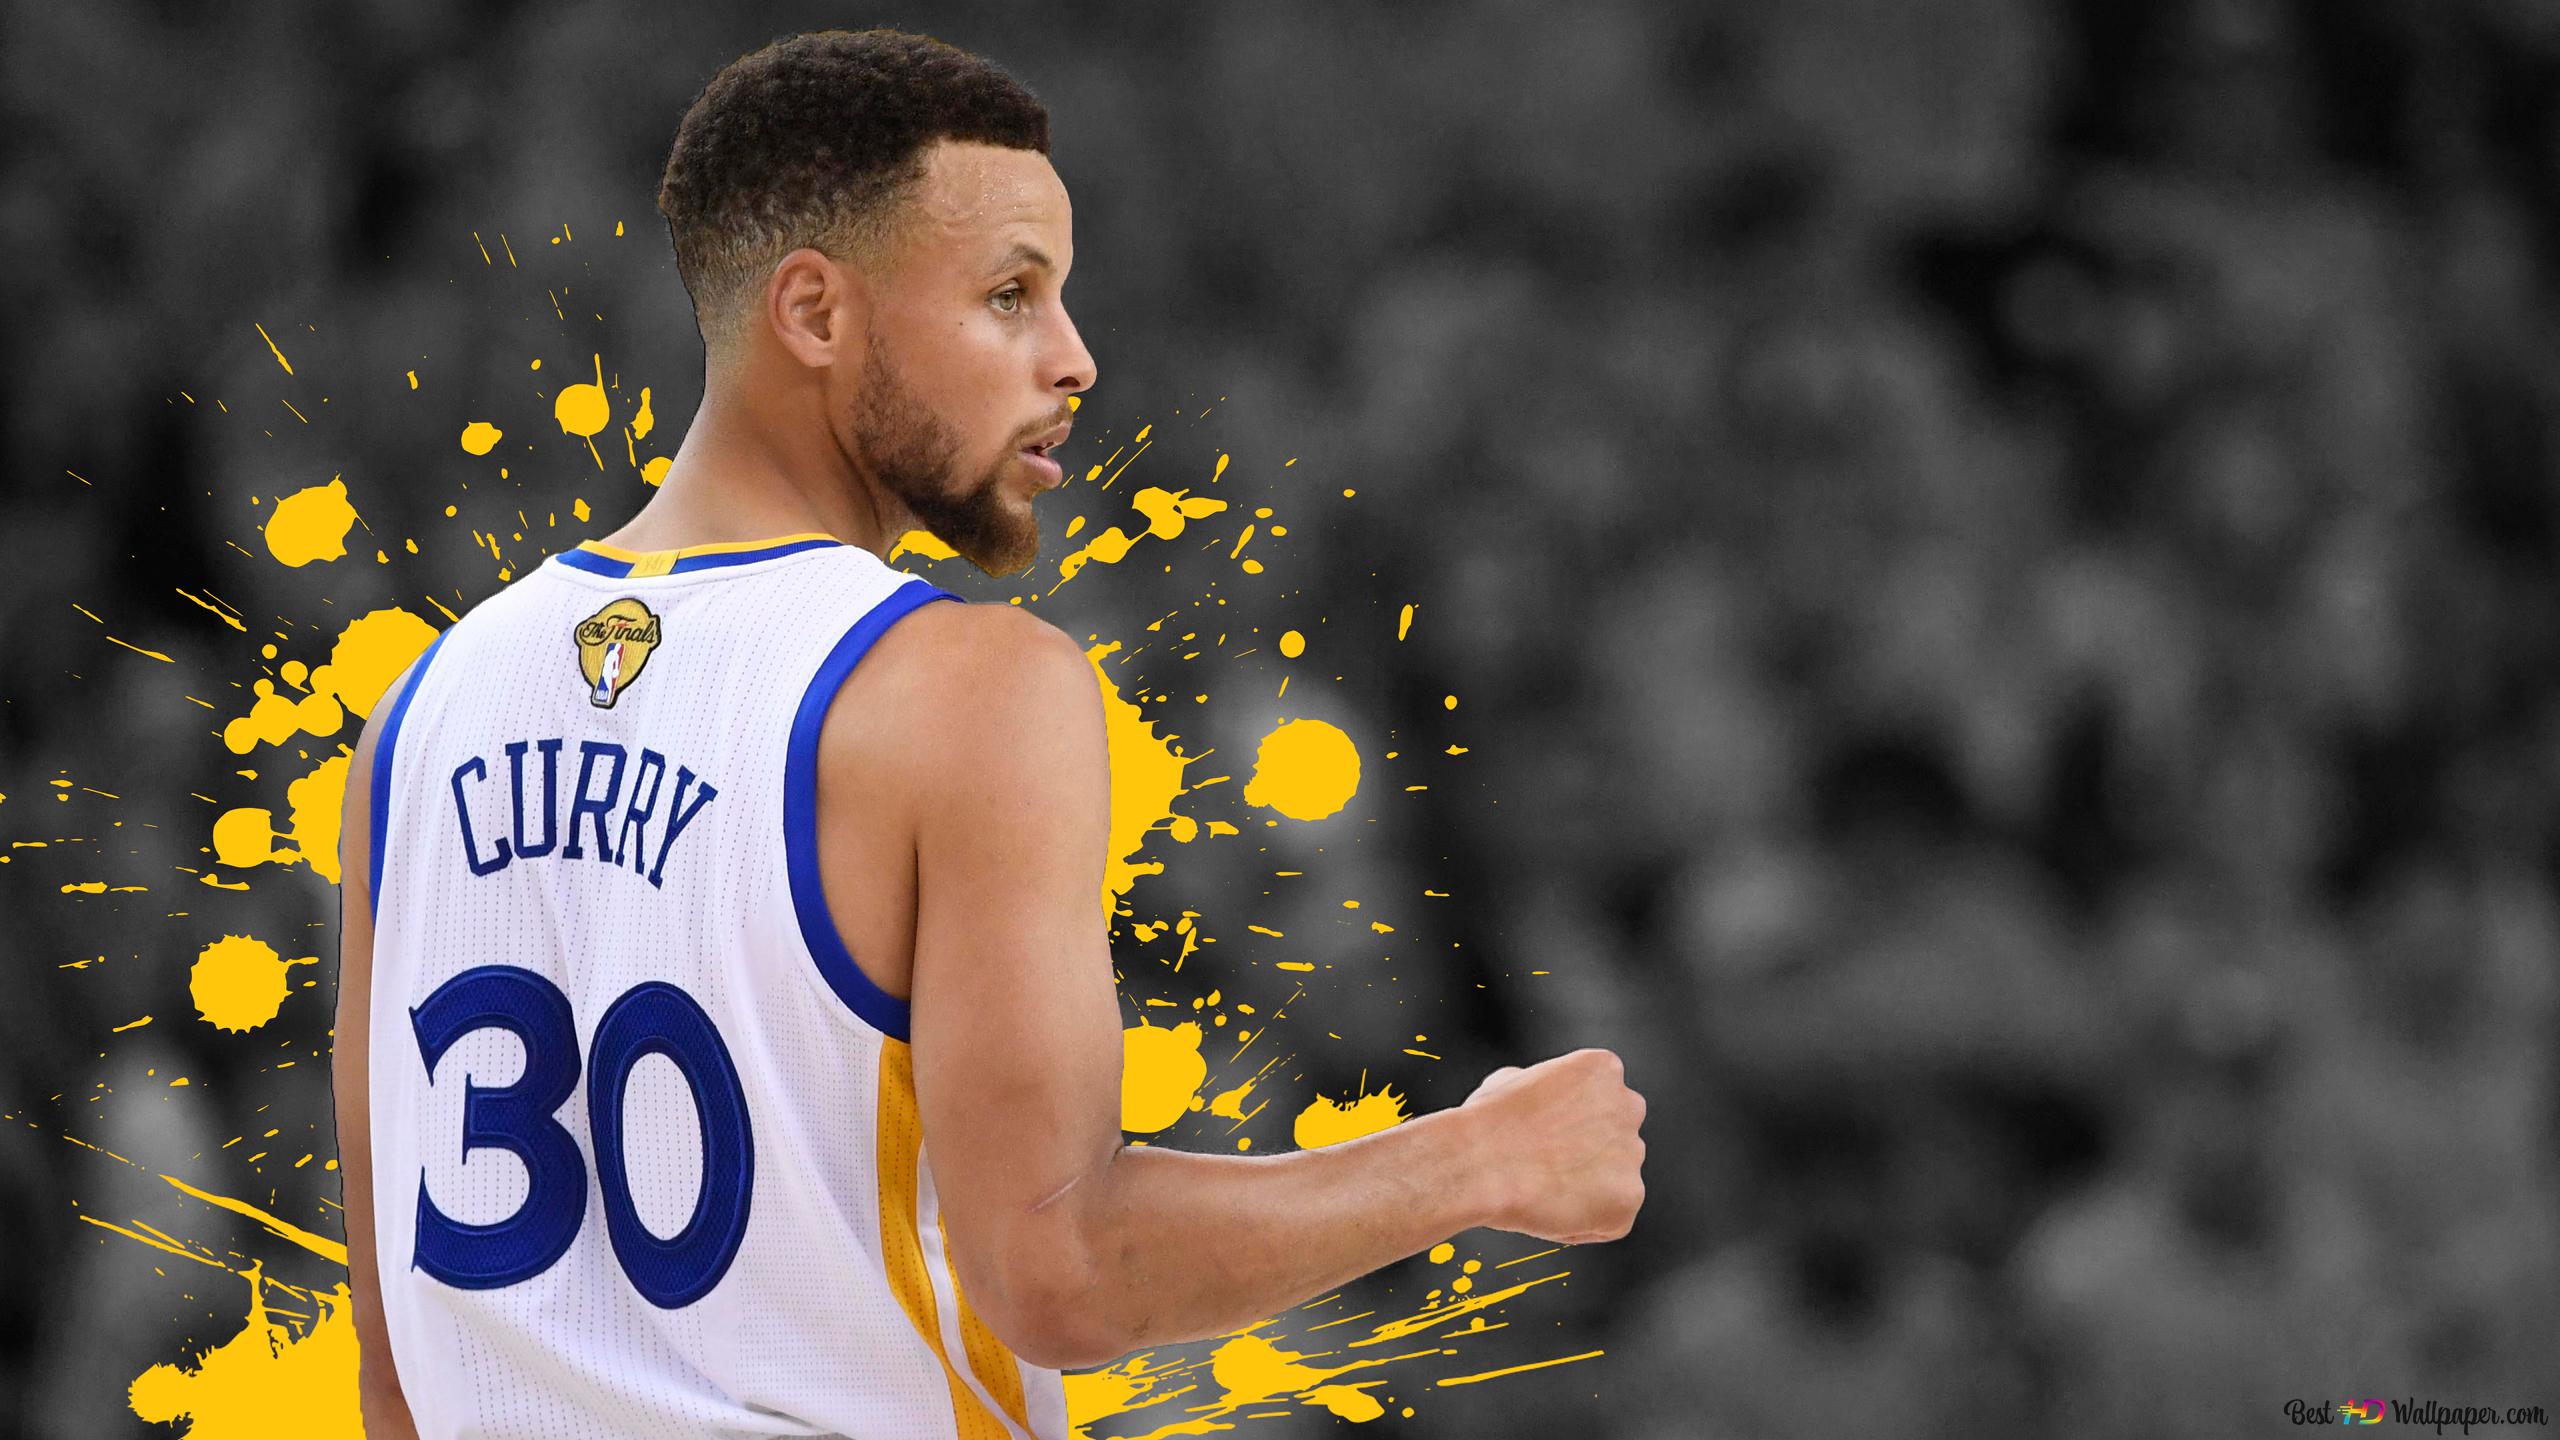 black and white background and stephen curry 2K wallpaper download